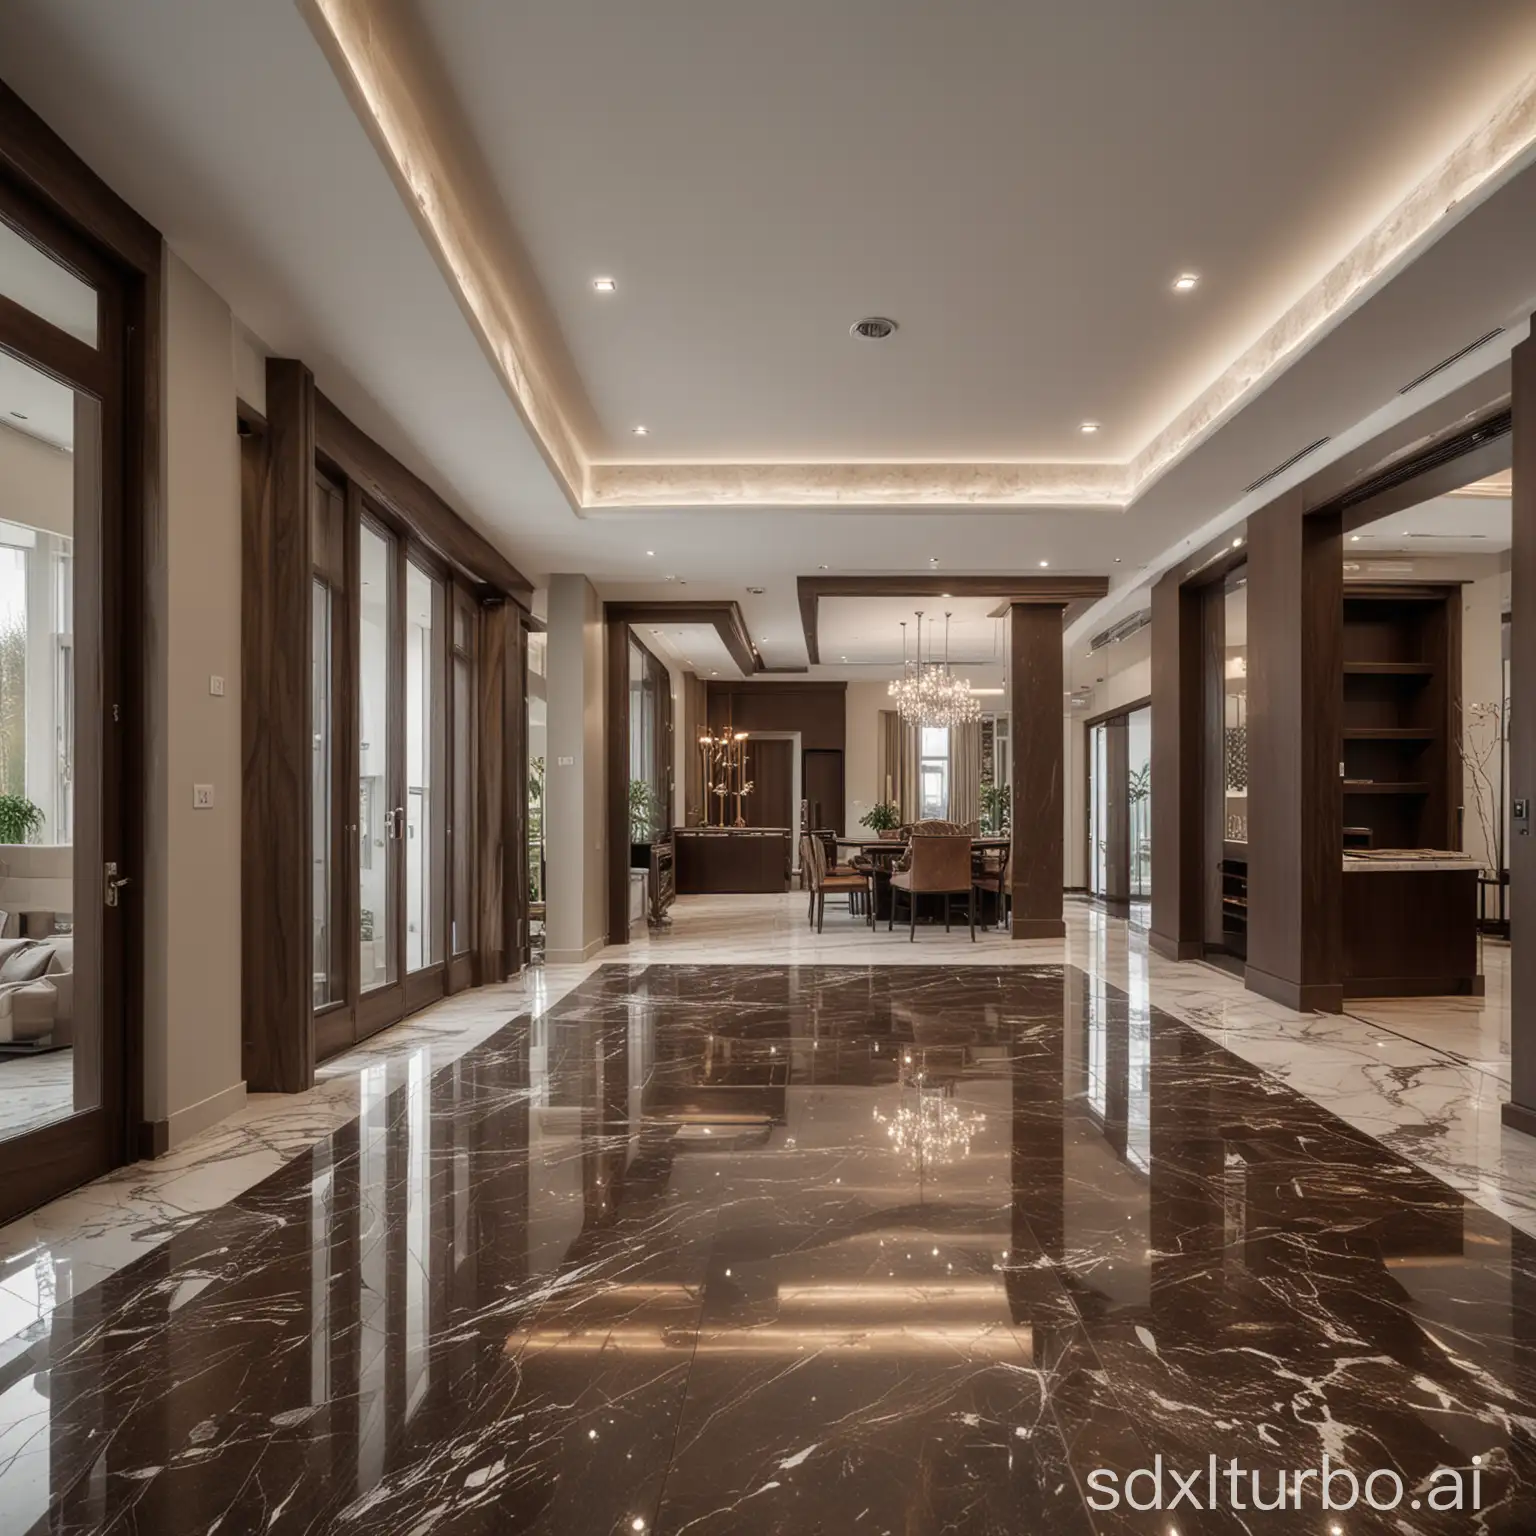 beautiful, stylish interior of a single-family building, luxury, marble floors, wooden furniture with dark brown color, photograph taken with Canon SLR camera with wide-angle lens f/2.0